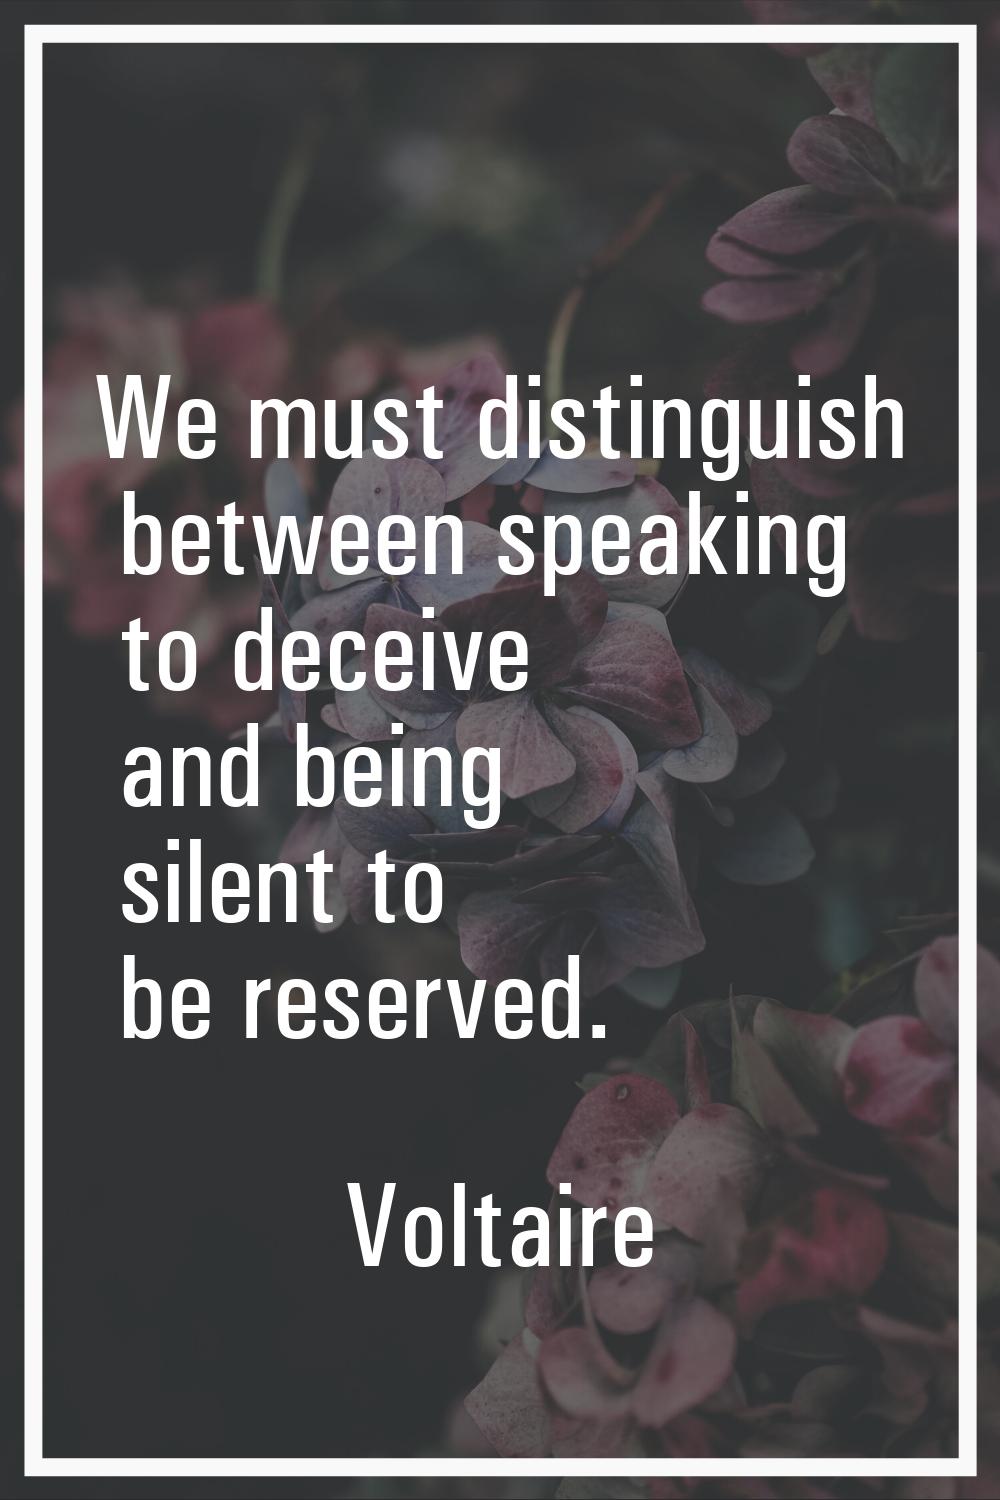 We must distinguish between speaking to deceive and being silent to be reserved.